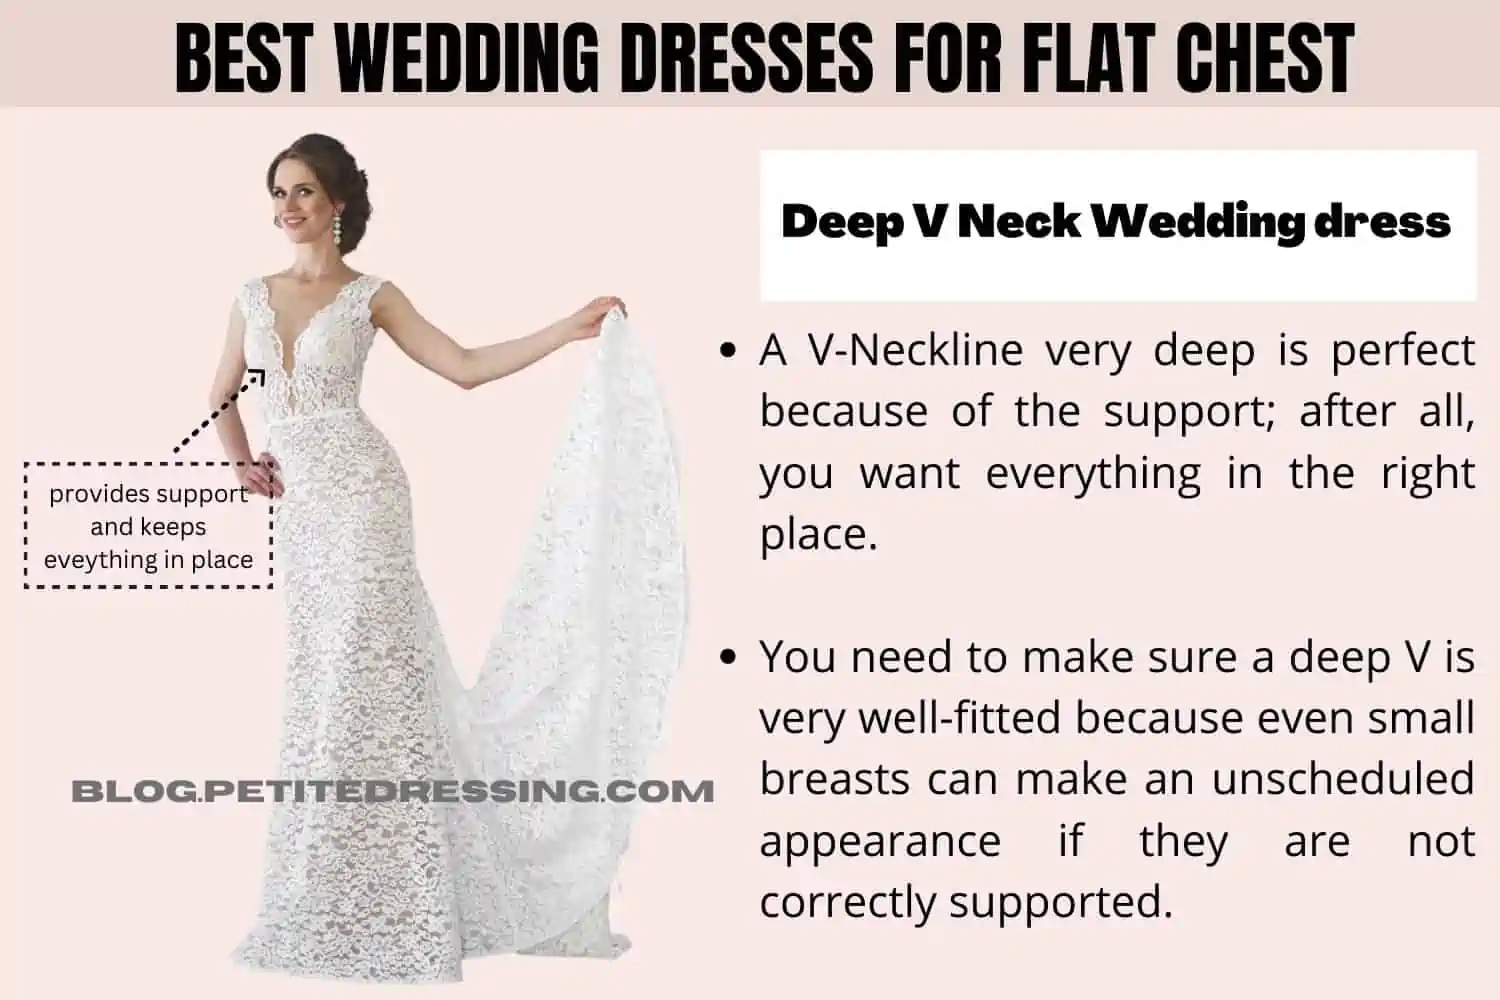 Wedding Dresses for Flat Chest: 10 Must Have Styles - Petite Dressing